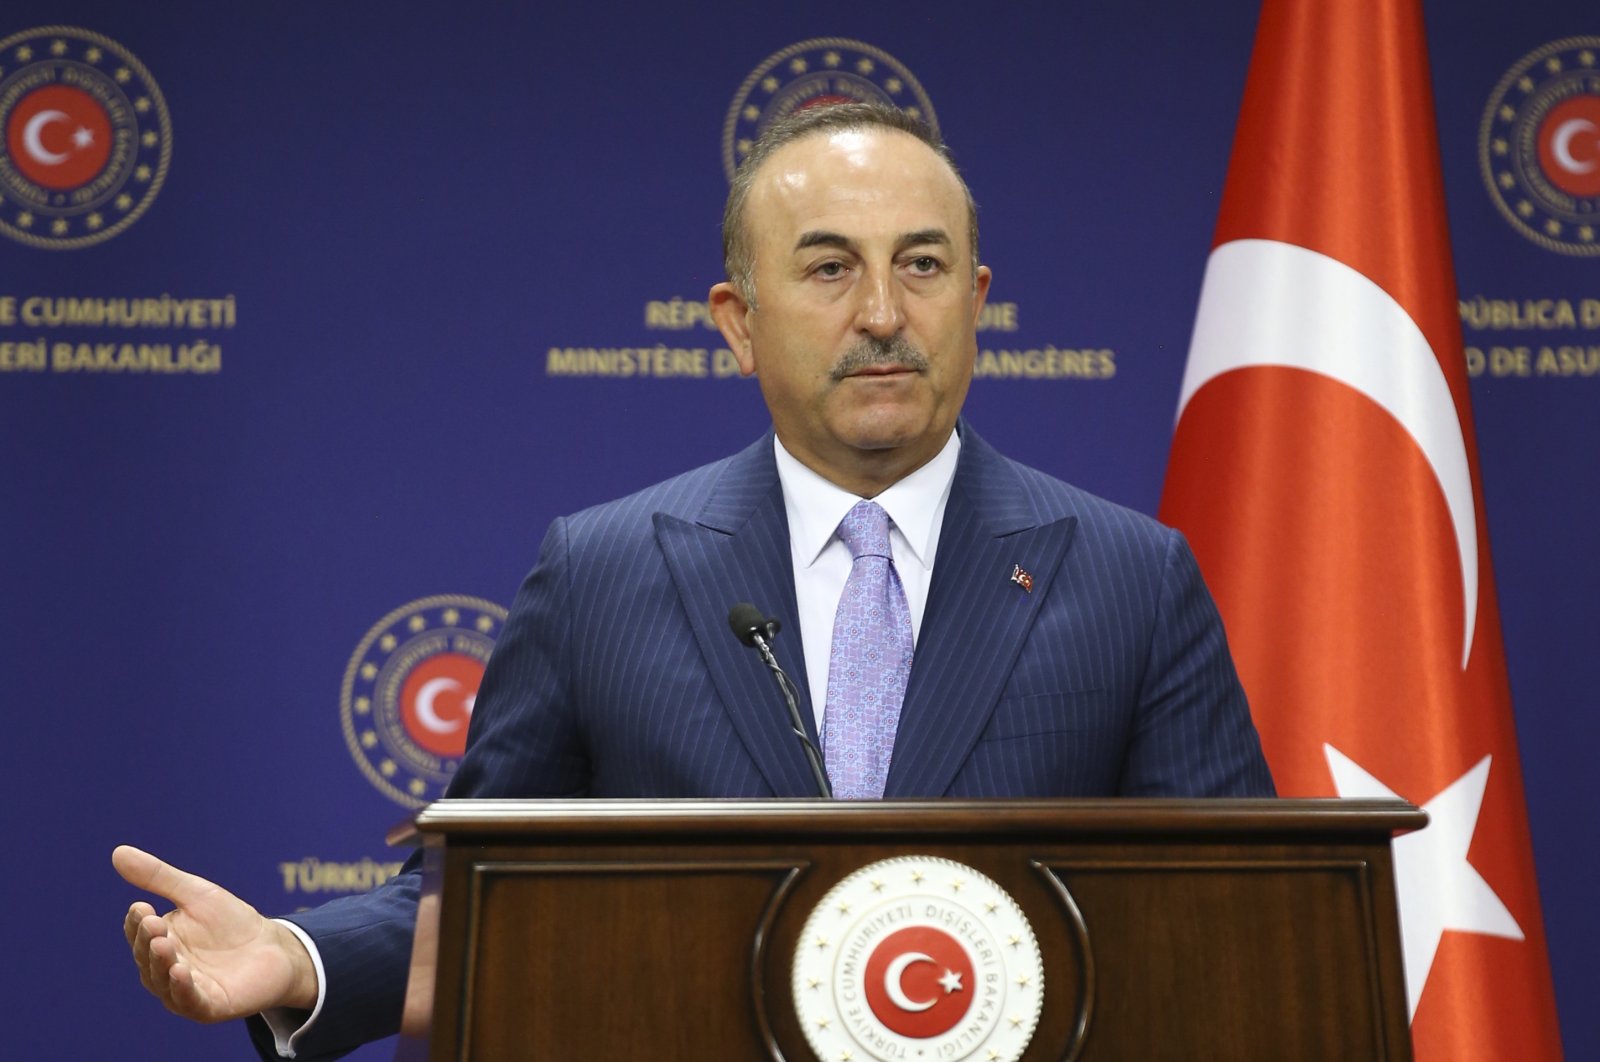 Foreign Minister Mevlüt Çavuşoğlu speaks at a joint news conference with Hungary's Foreign Minister Peter Szijjart after their talks, in Ankara, Turkey, Tuesday, June 30, 2020. (AP Photo)